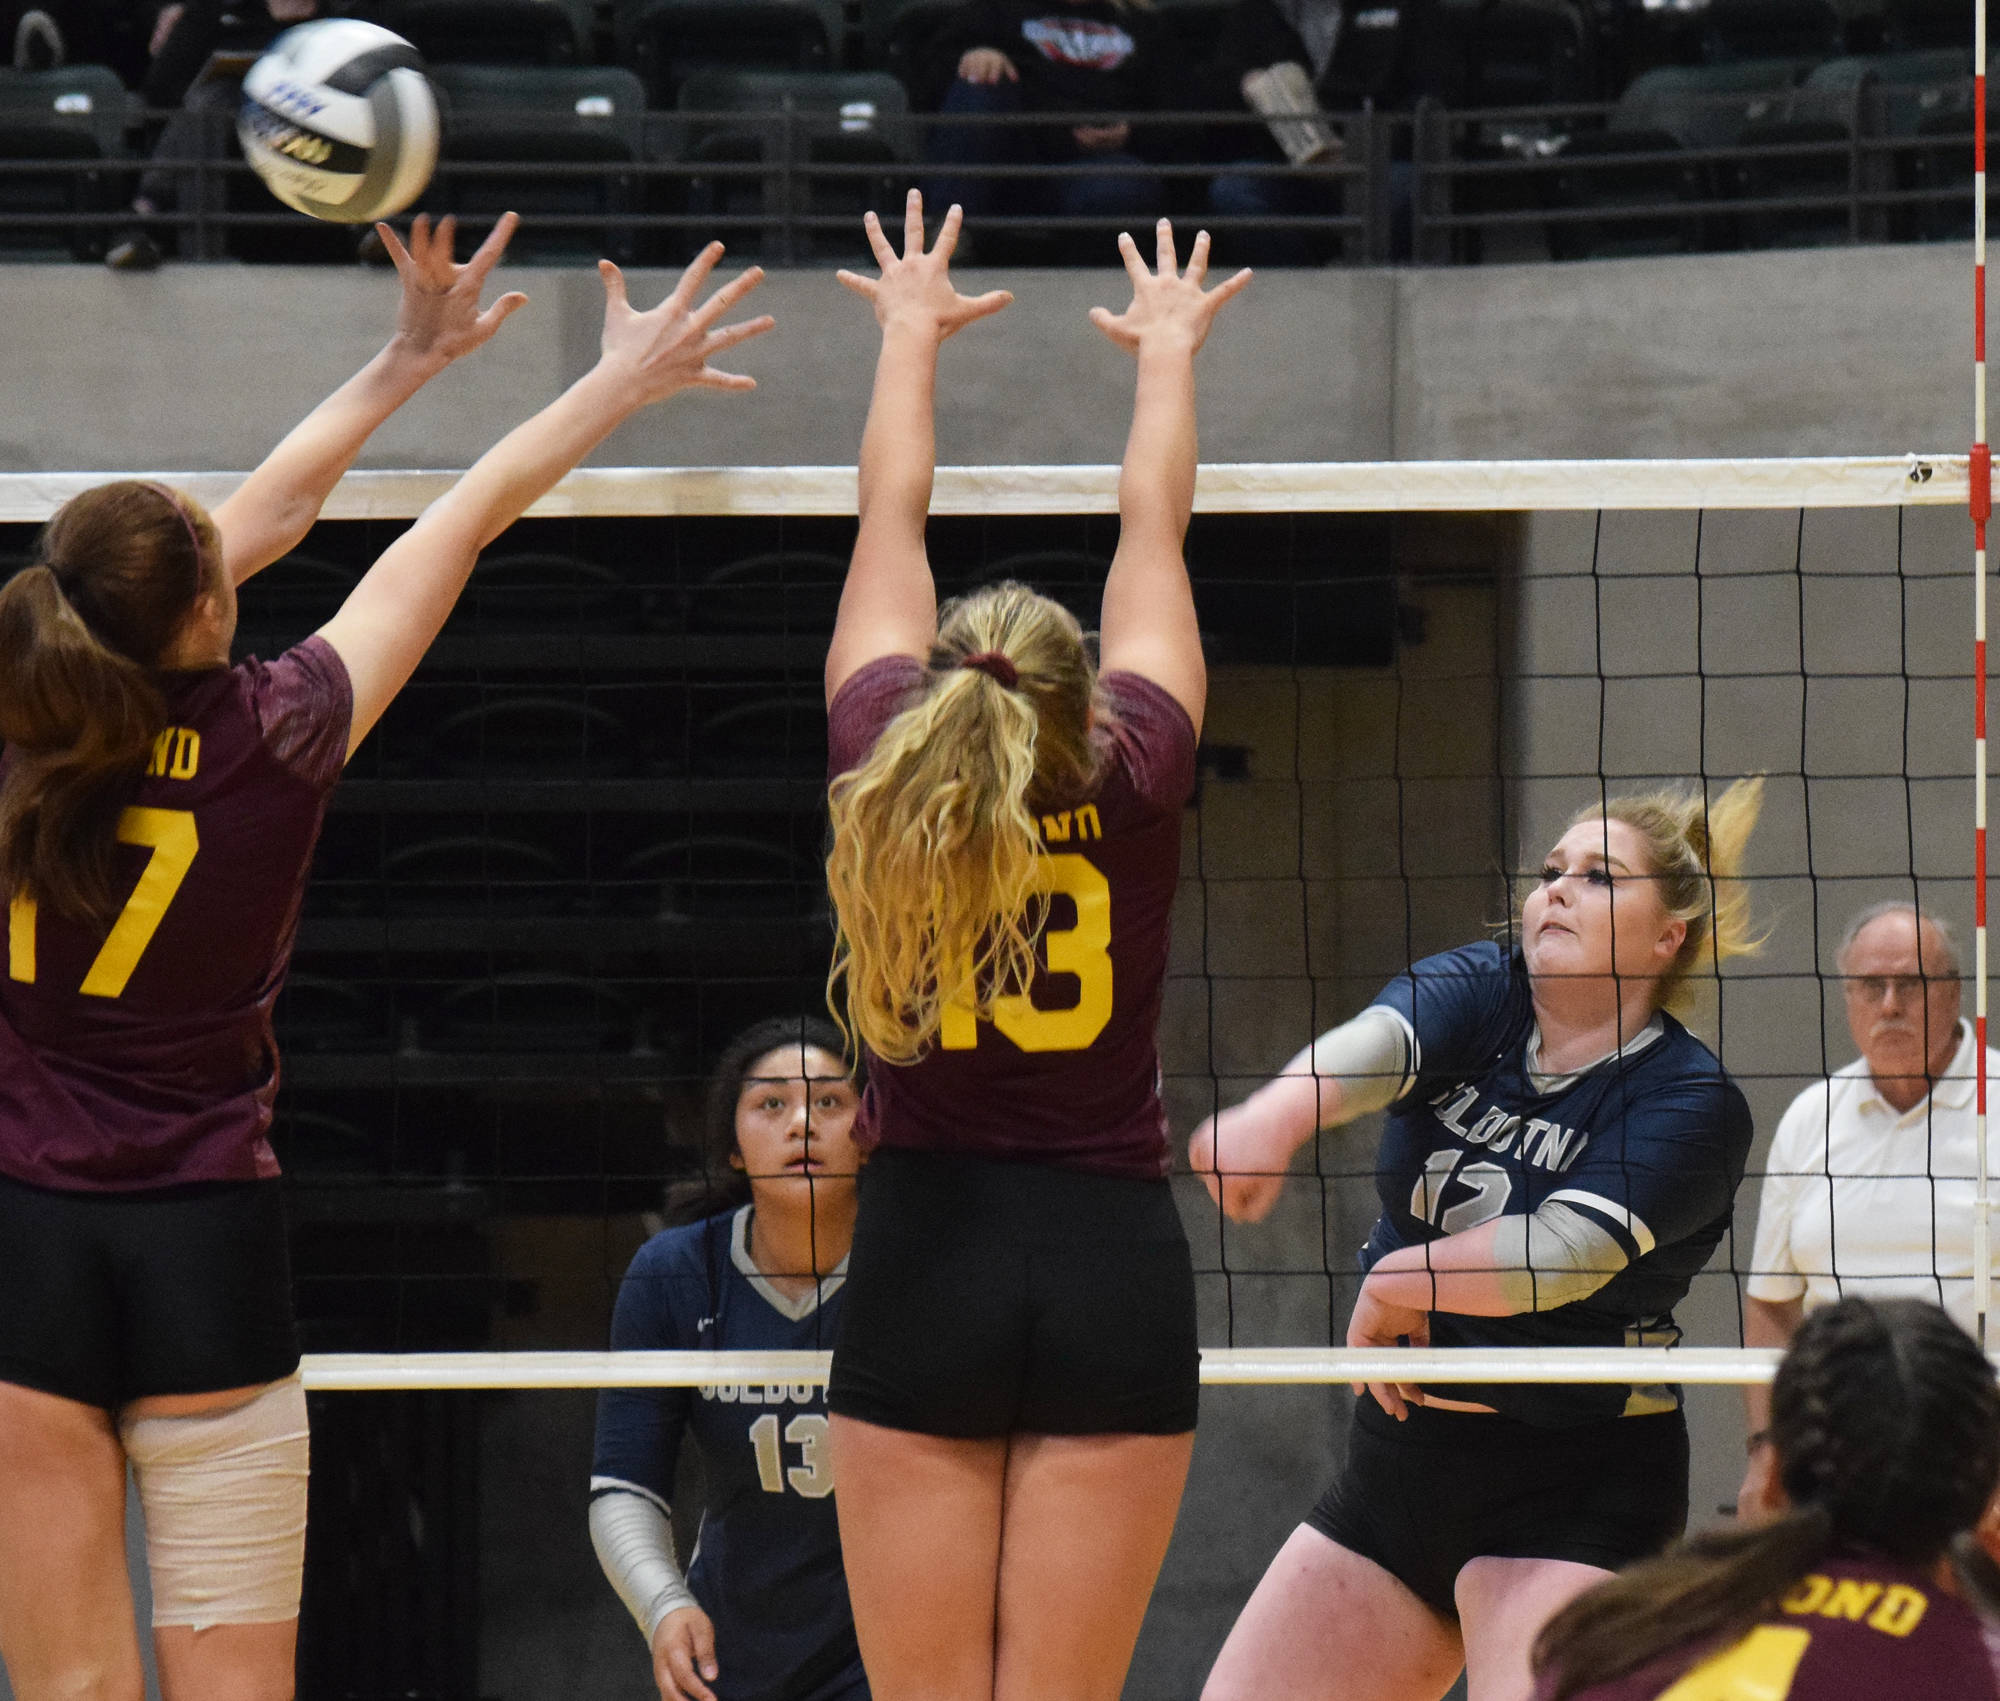 Soldotna’s Bailey Armstrong sends a ball over Dimond’s Kimberly Roth (left) and Hahni Johnson, Thursday, Nov. 14, 2019, at the Class 4A state volleyball tournament at the Alaska Airlines Center in Anchorage, Alaska. (Photo by Joey Klecka/Peninsula Clarion)